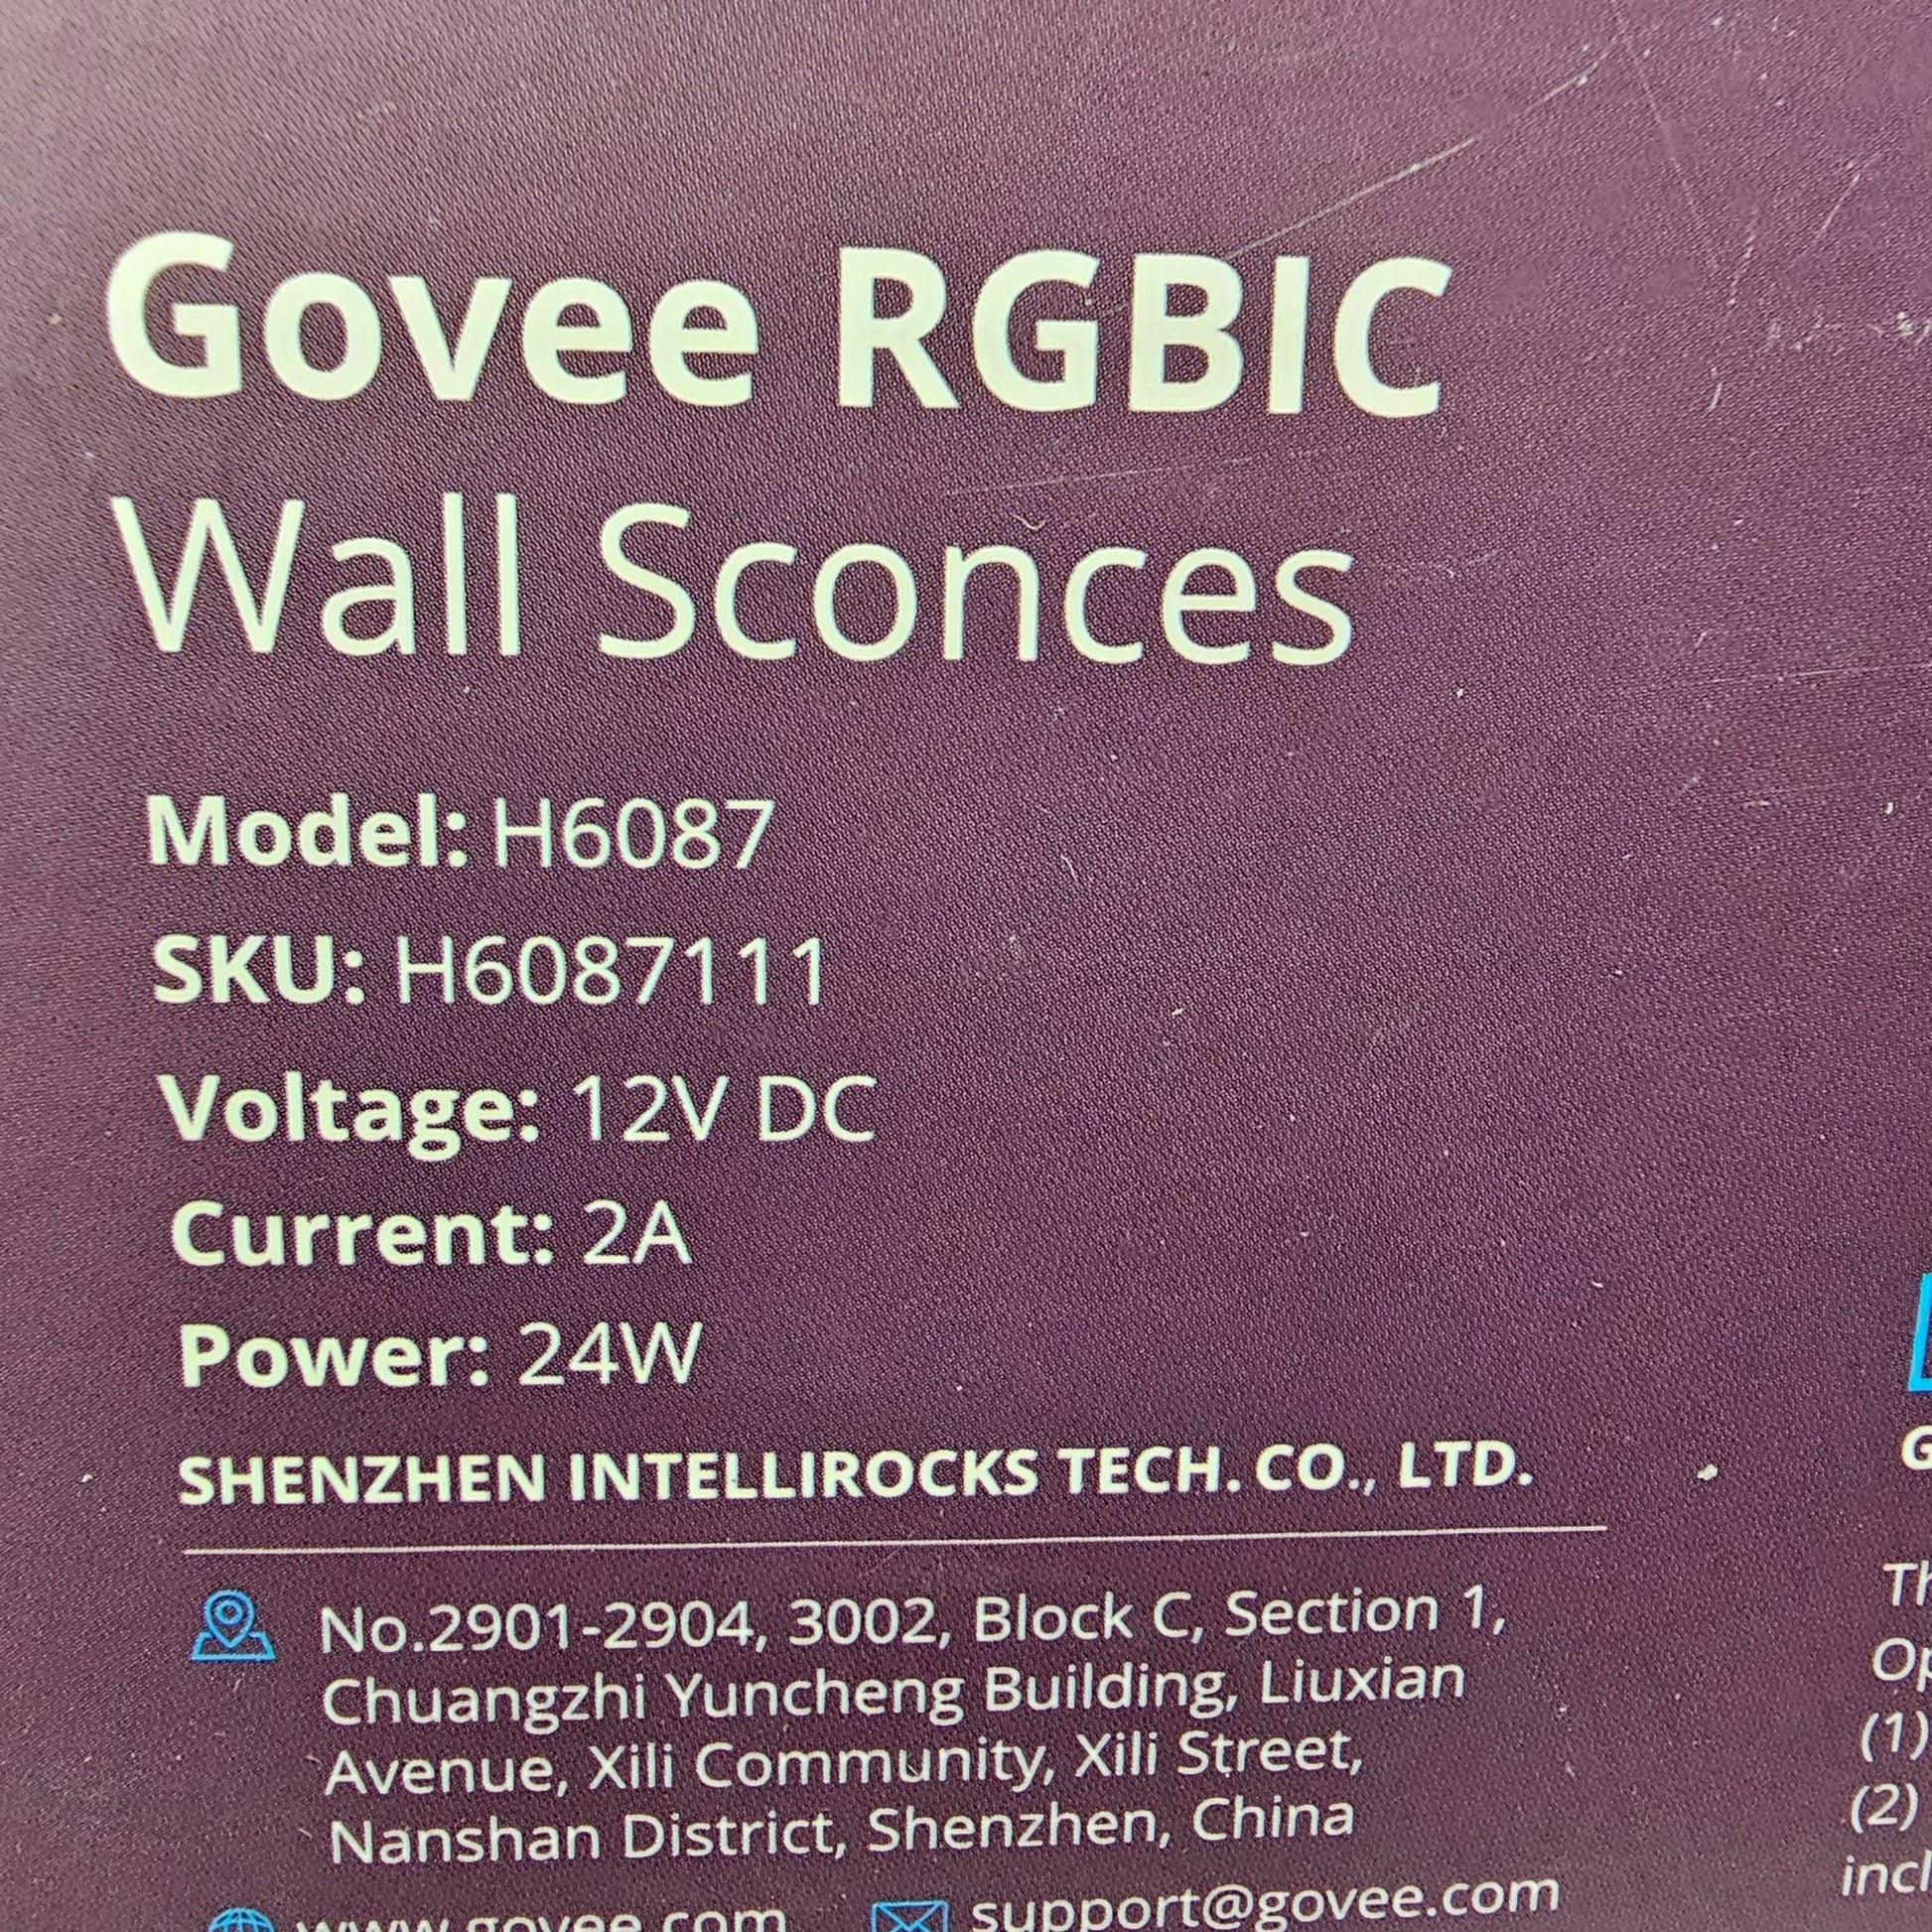 Wall Sconces RGBIC Govee H6087 - DQ Distribution